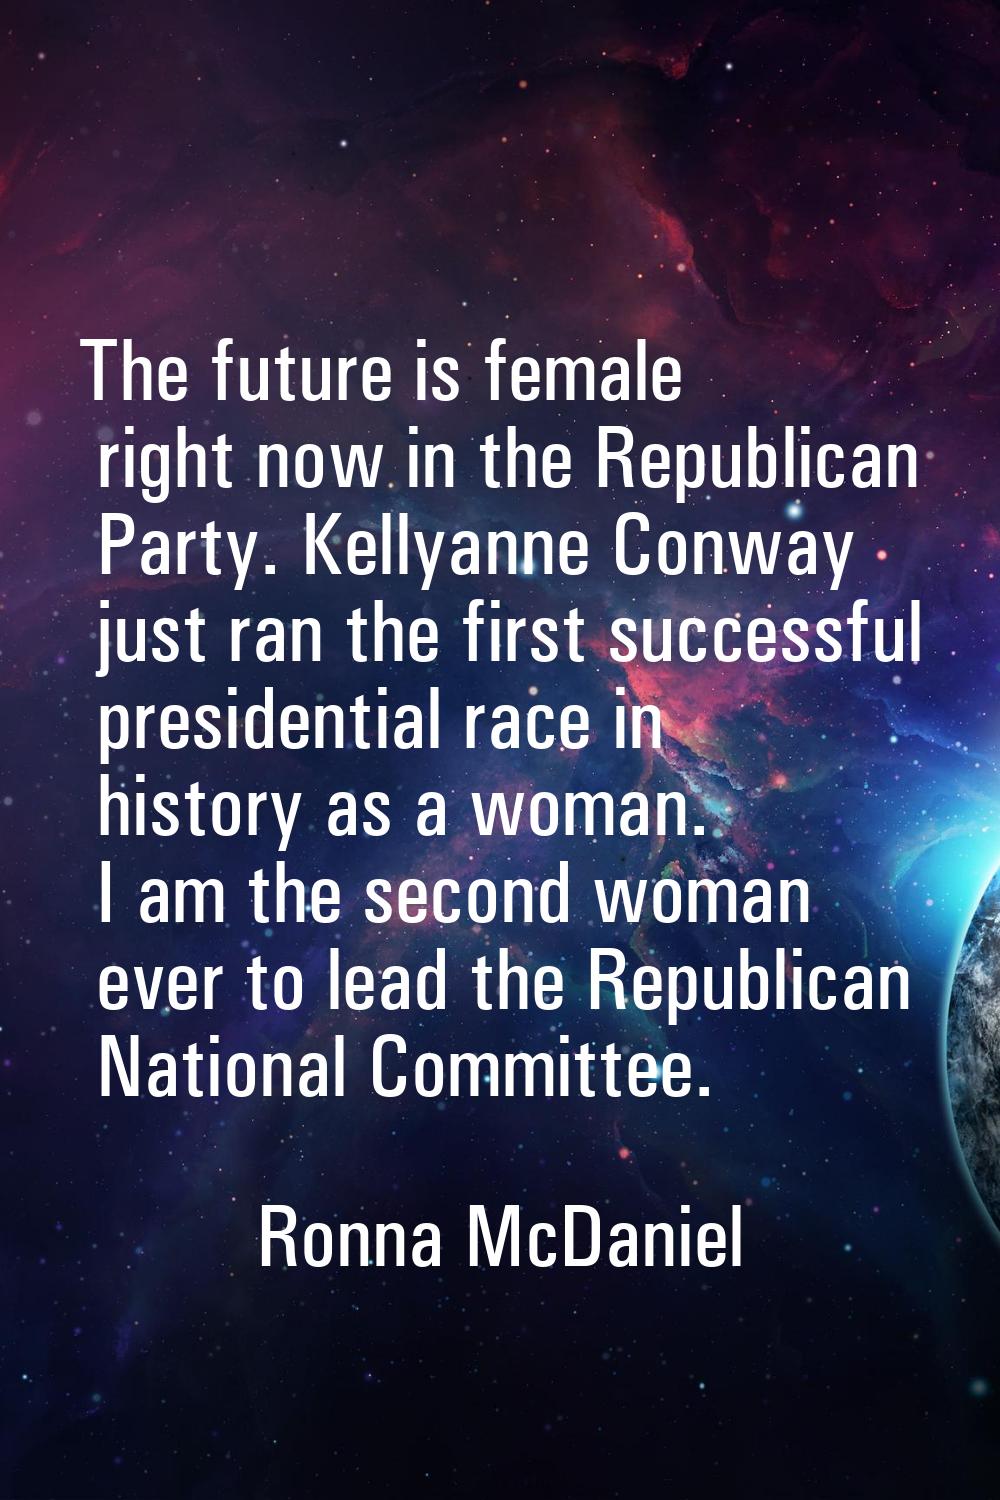 The future is female right now in the Republican Party. Kellyanne Conway just ran the first success